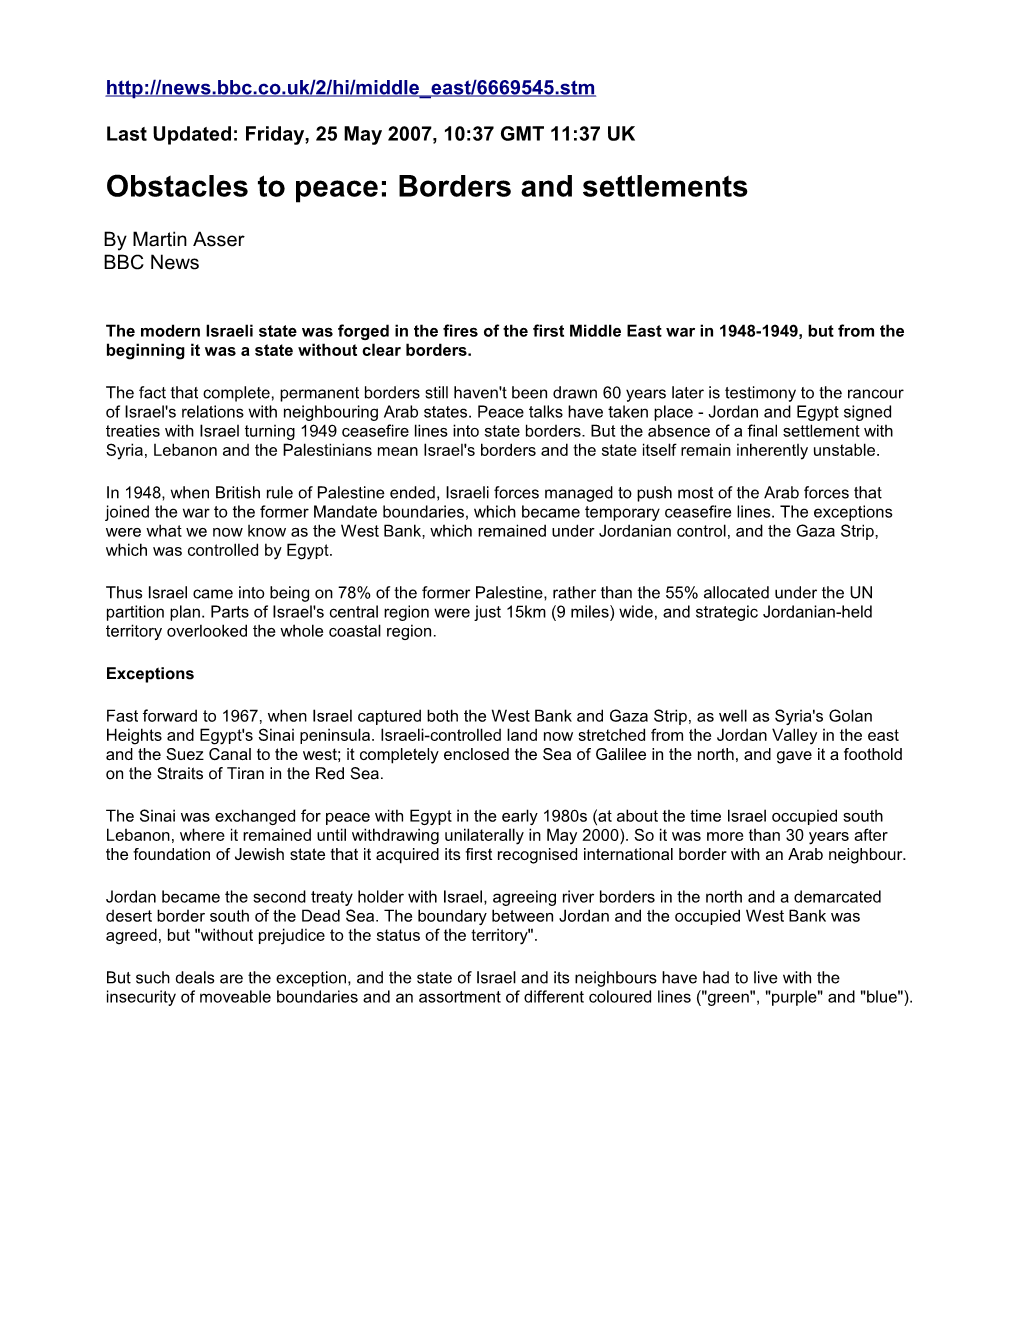 Obstacles to Peace: Borders and Settlements